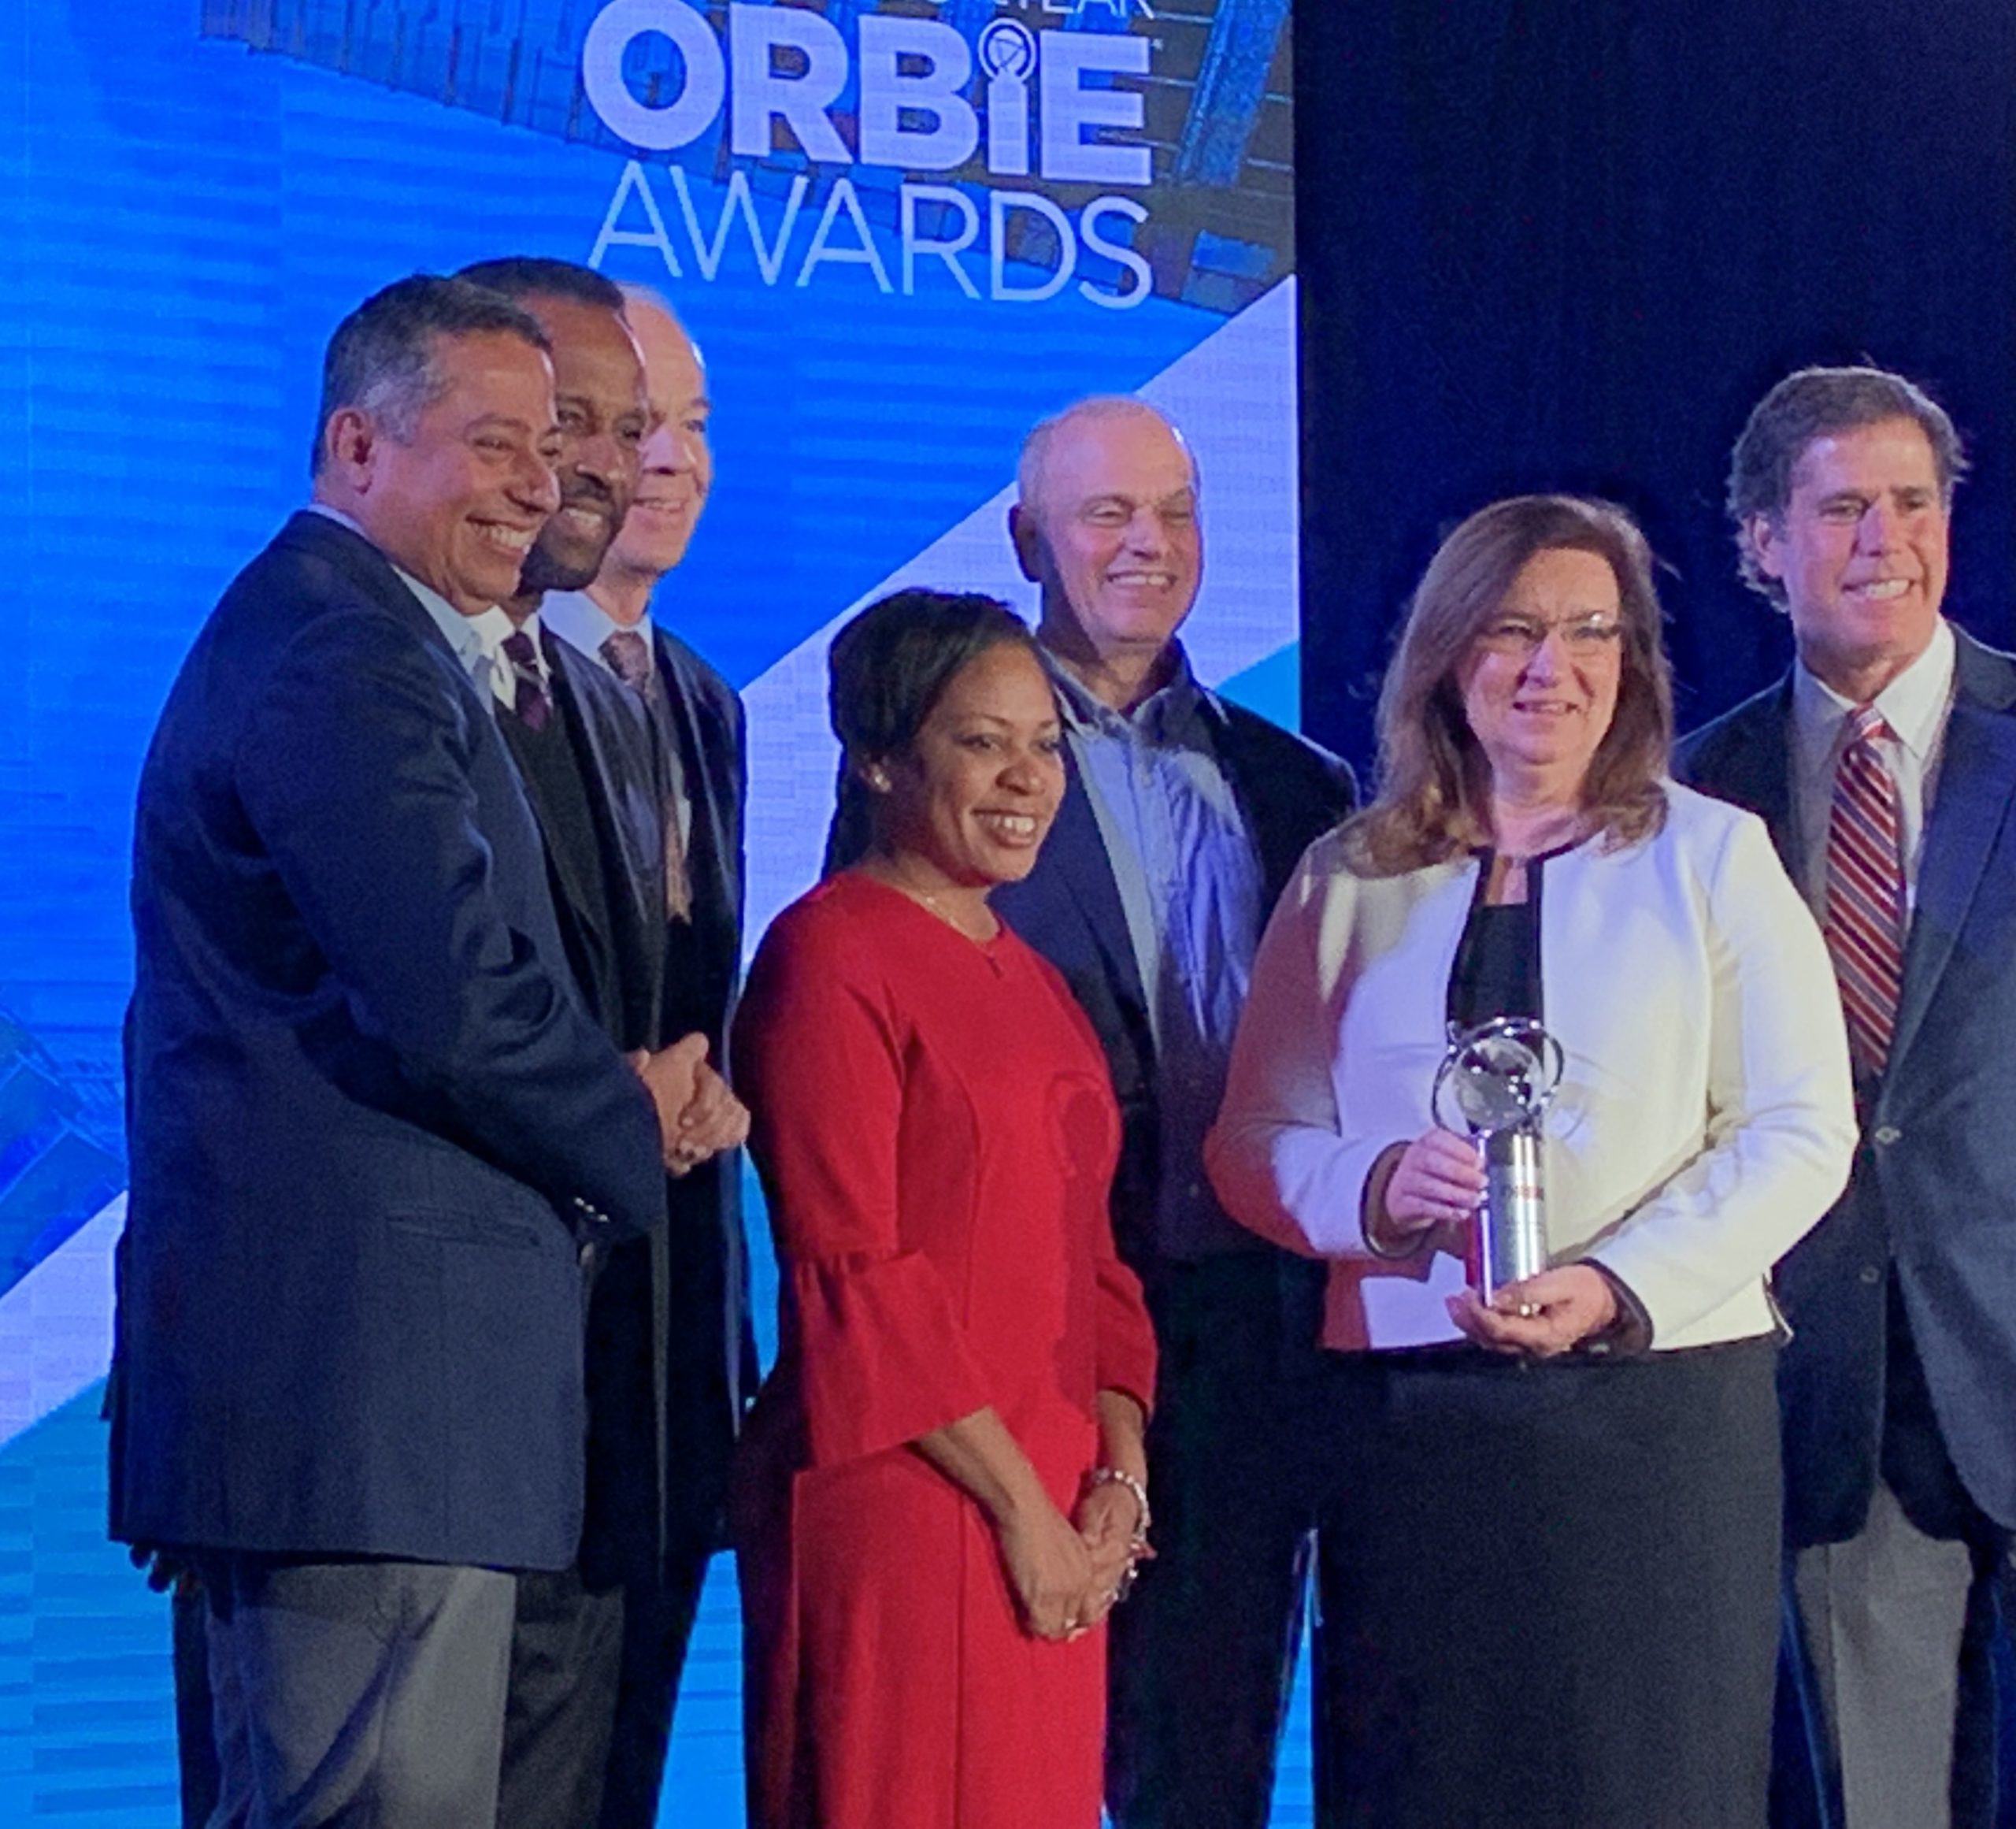 Shirl Stroeing holding her ORBIE award. She is surrounded by smiling colleagues.